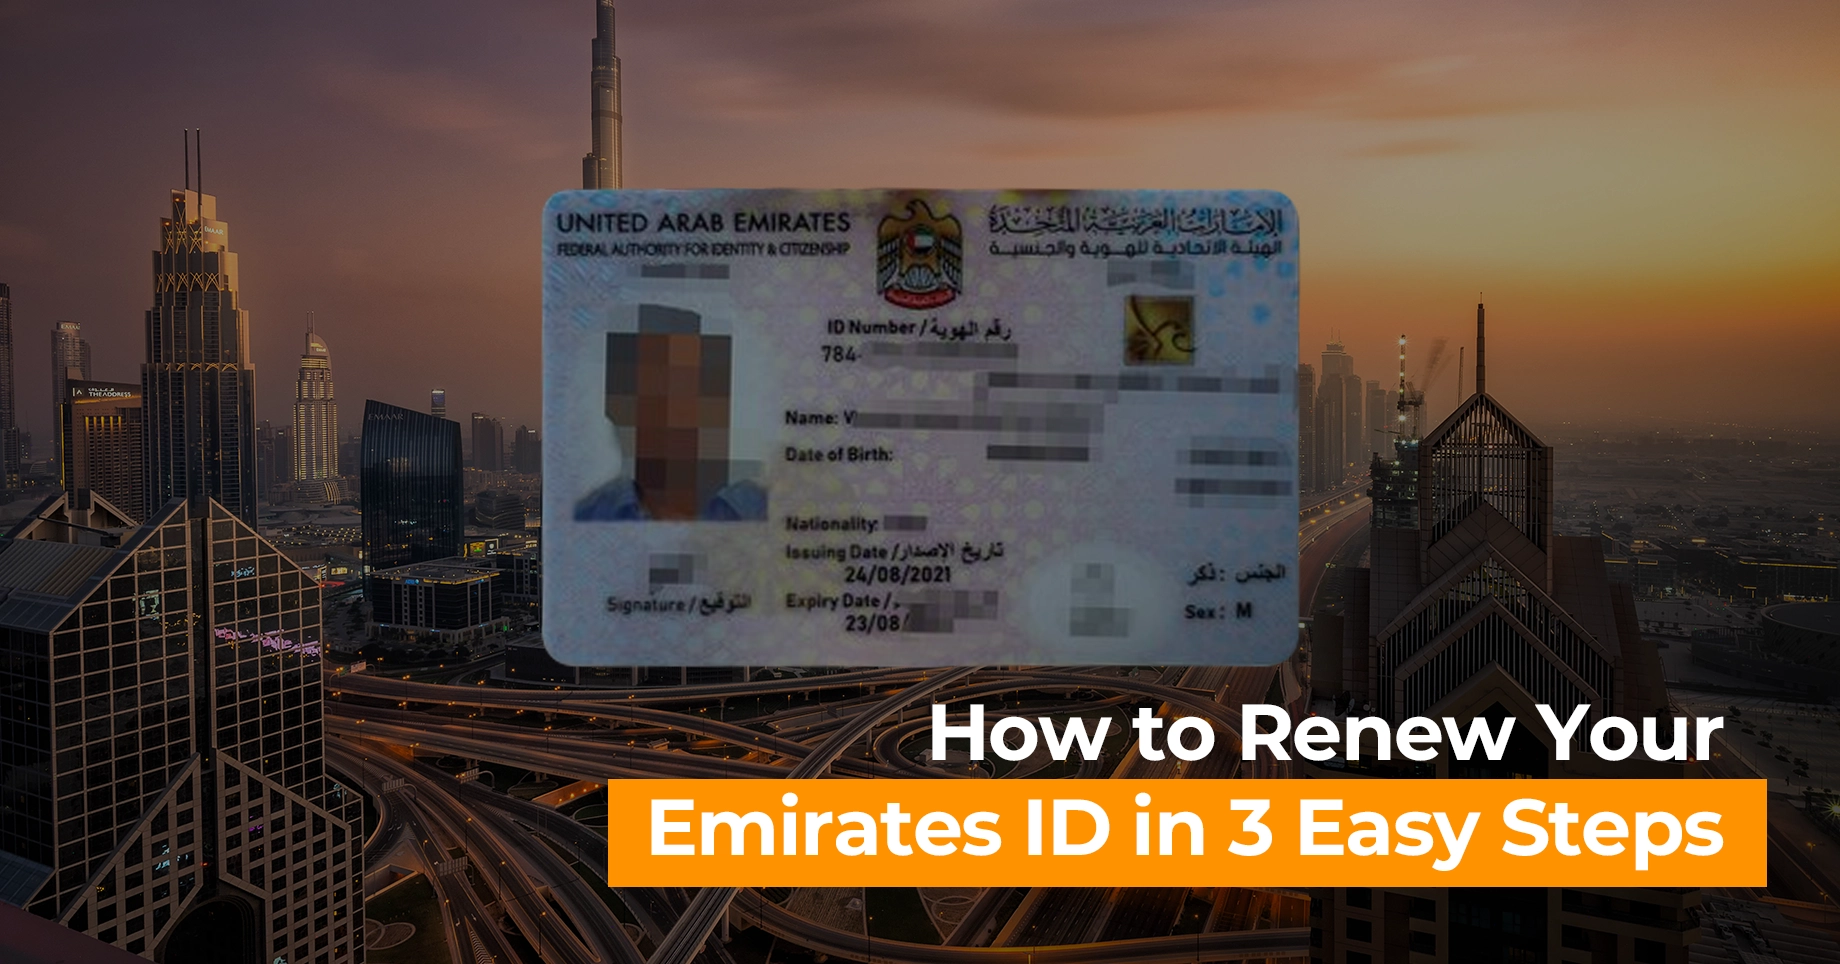 How to Renew Your Emirates ID in 3 Easy Steps